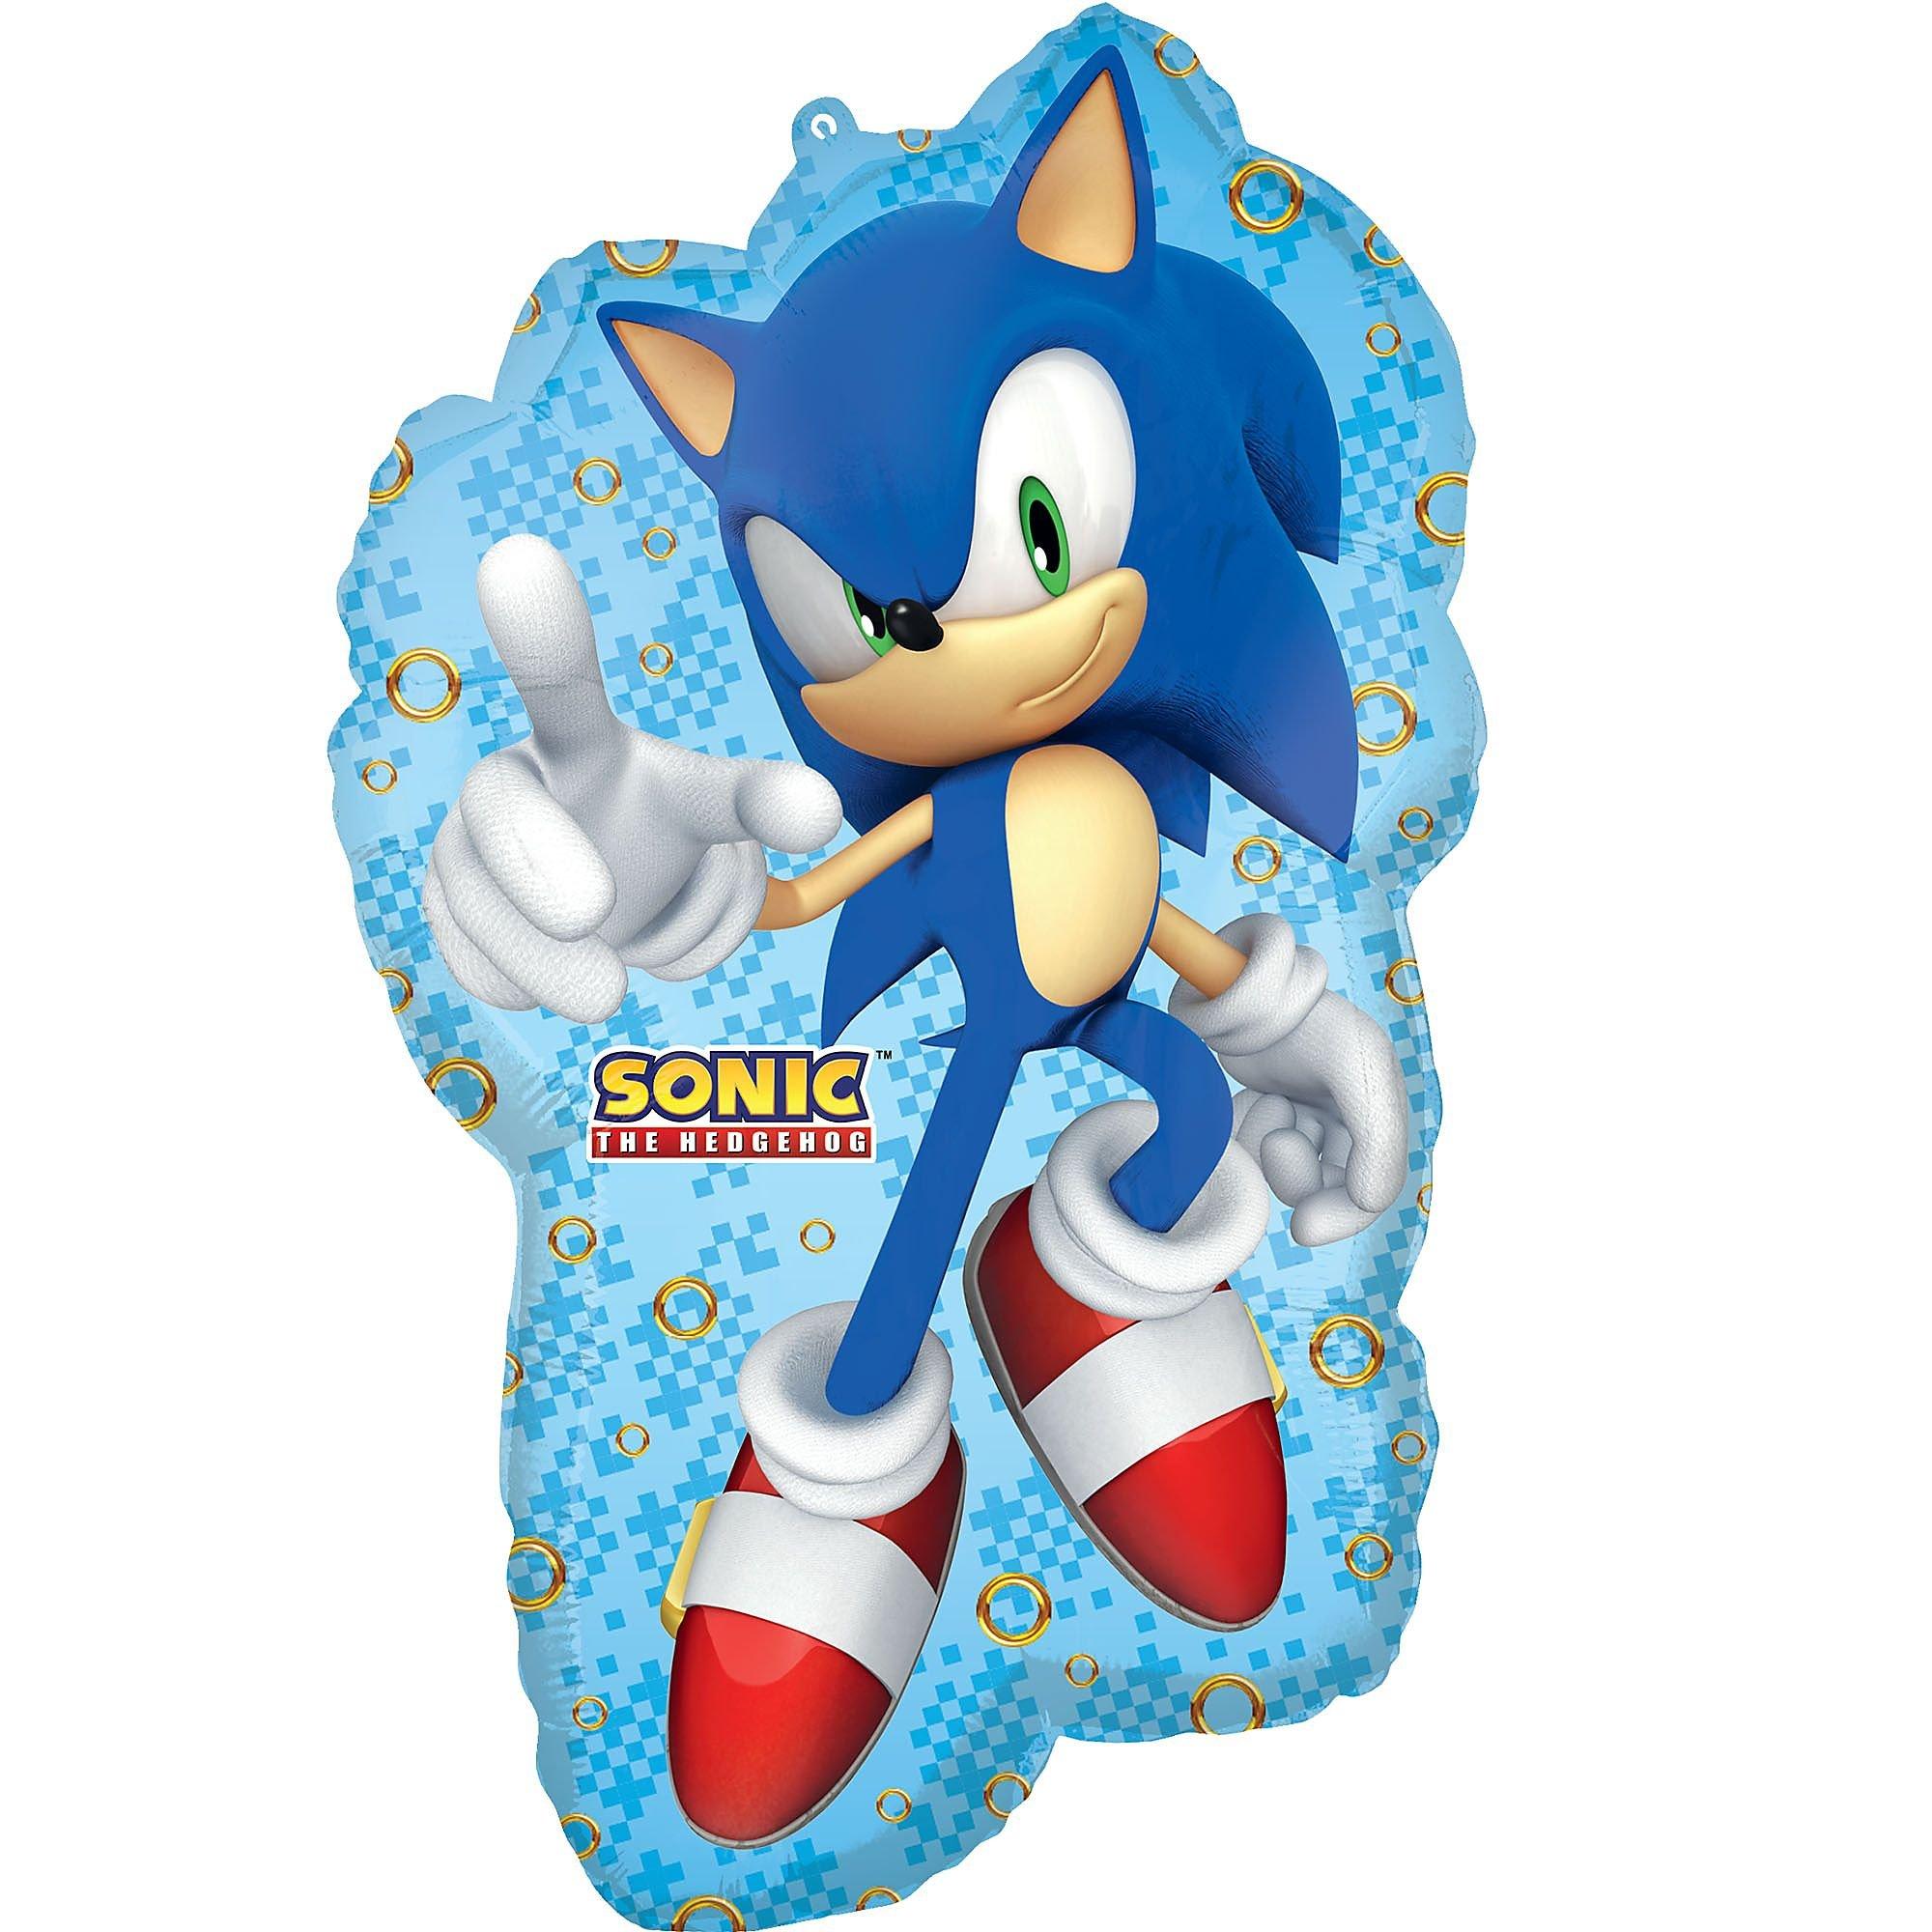 Hand Crafted, Party Supplies, Sonic Pinata